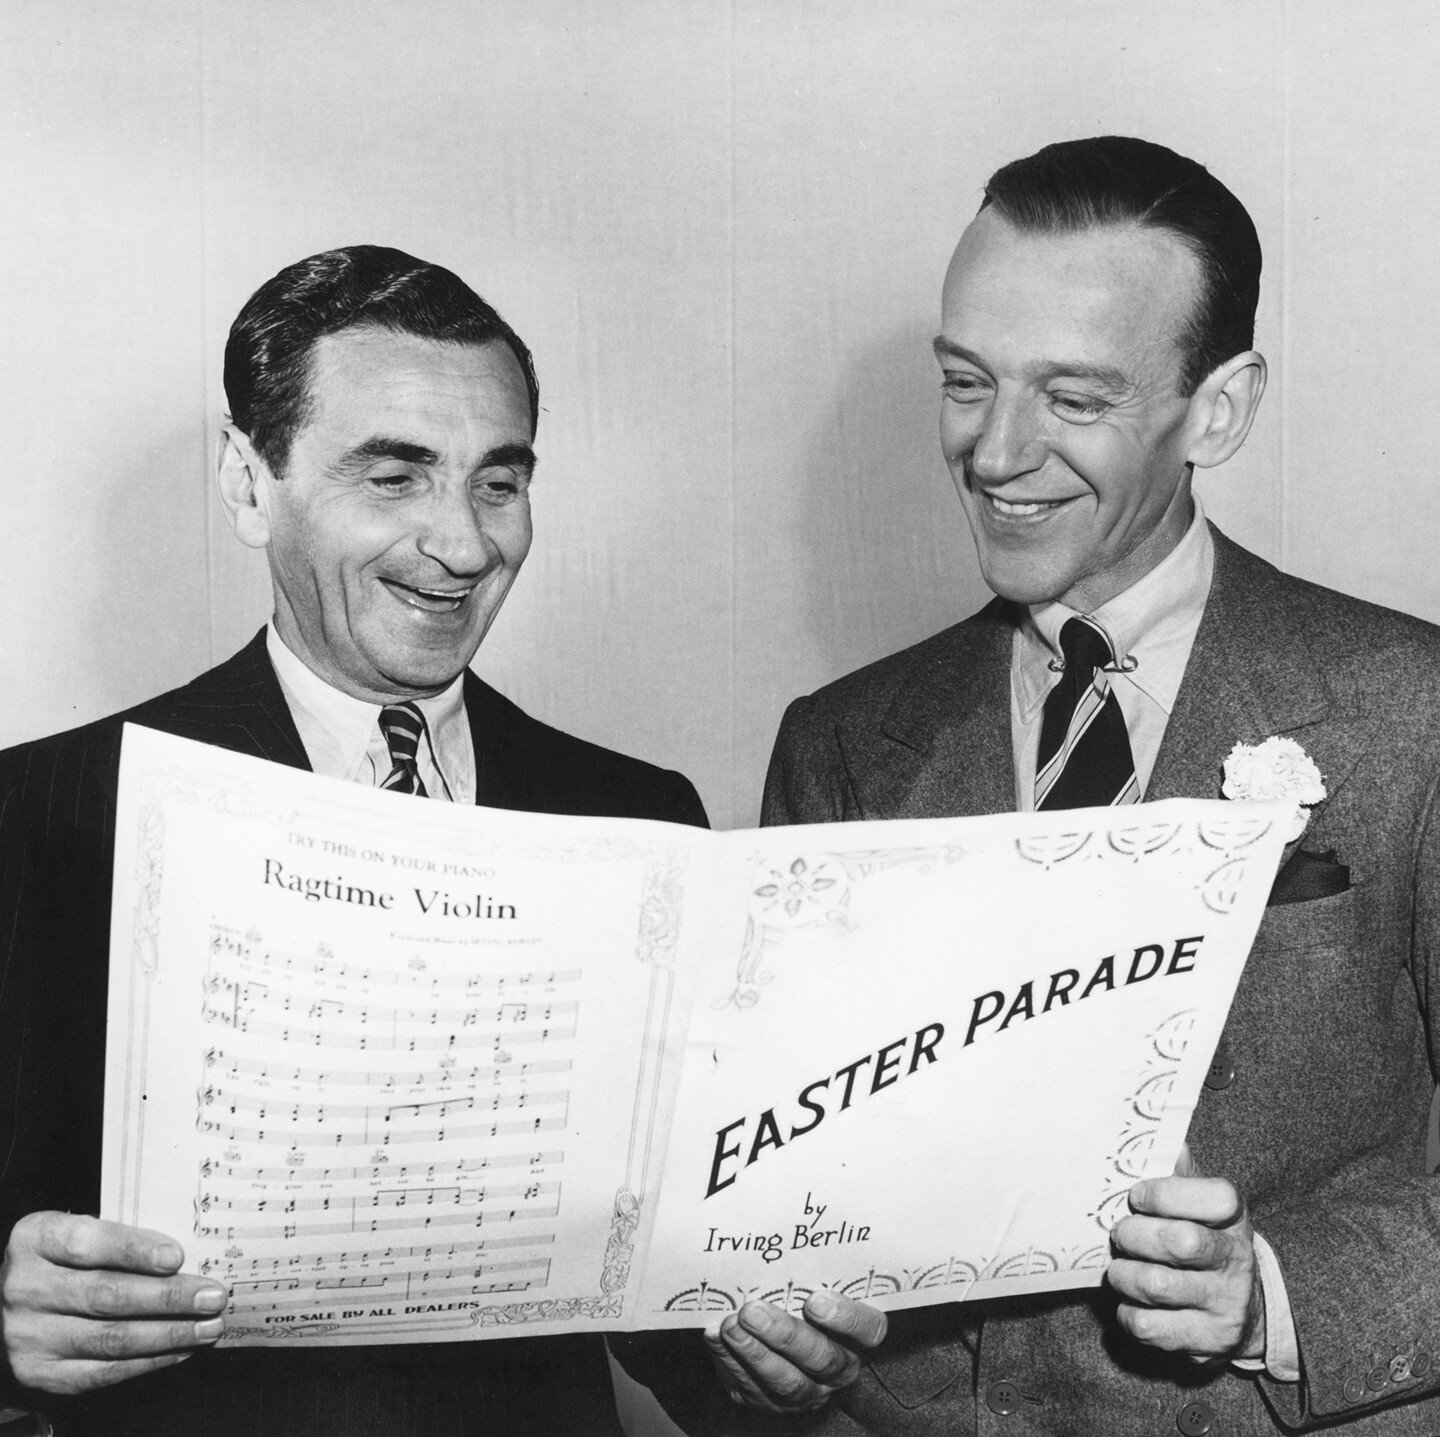 TODAY IN HISTORY: On June 30, 1948 &mdash; Irving Berlin's film EASTER PARADE debuted in New York City! 🎞️

The musical film starred #FredAstaire and #JudyGarland, and featured notable songs like &quot;Easter Parade&quot; and &quot;Steppin' Out With